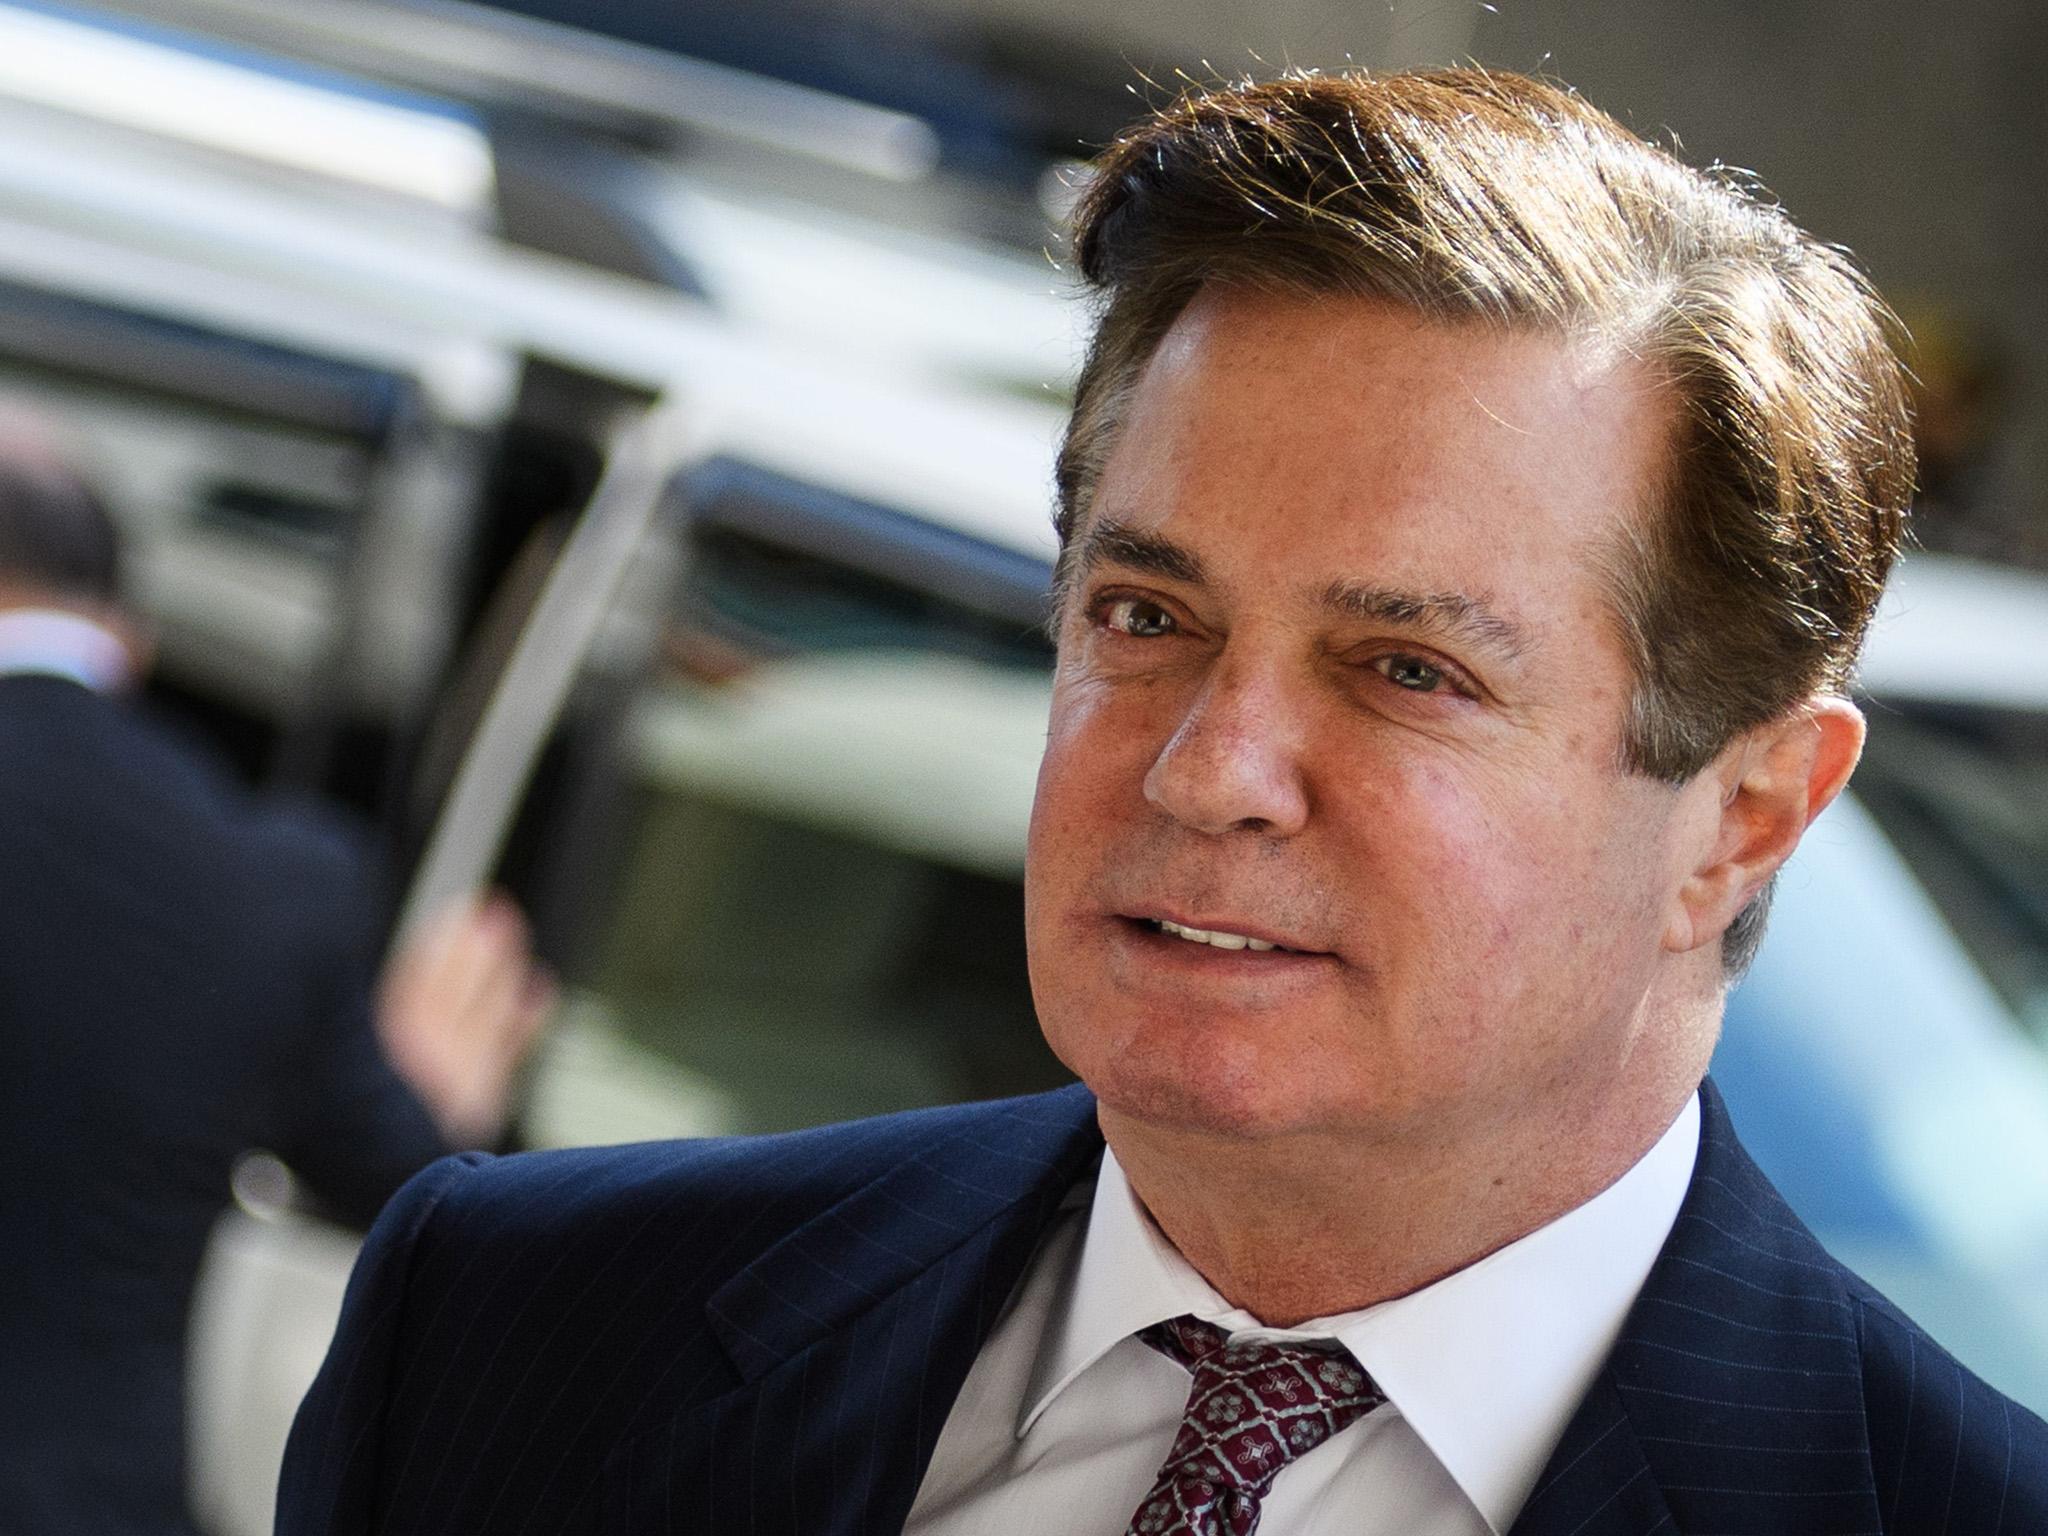 Paul Manafort was convicted in 2018 on eight counts of fraud